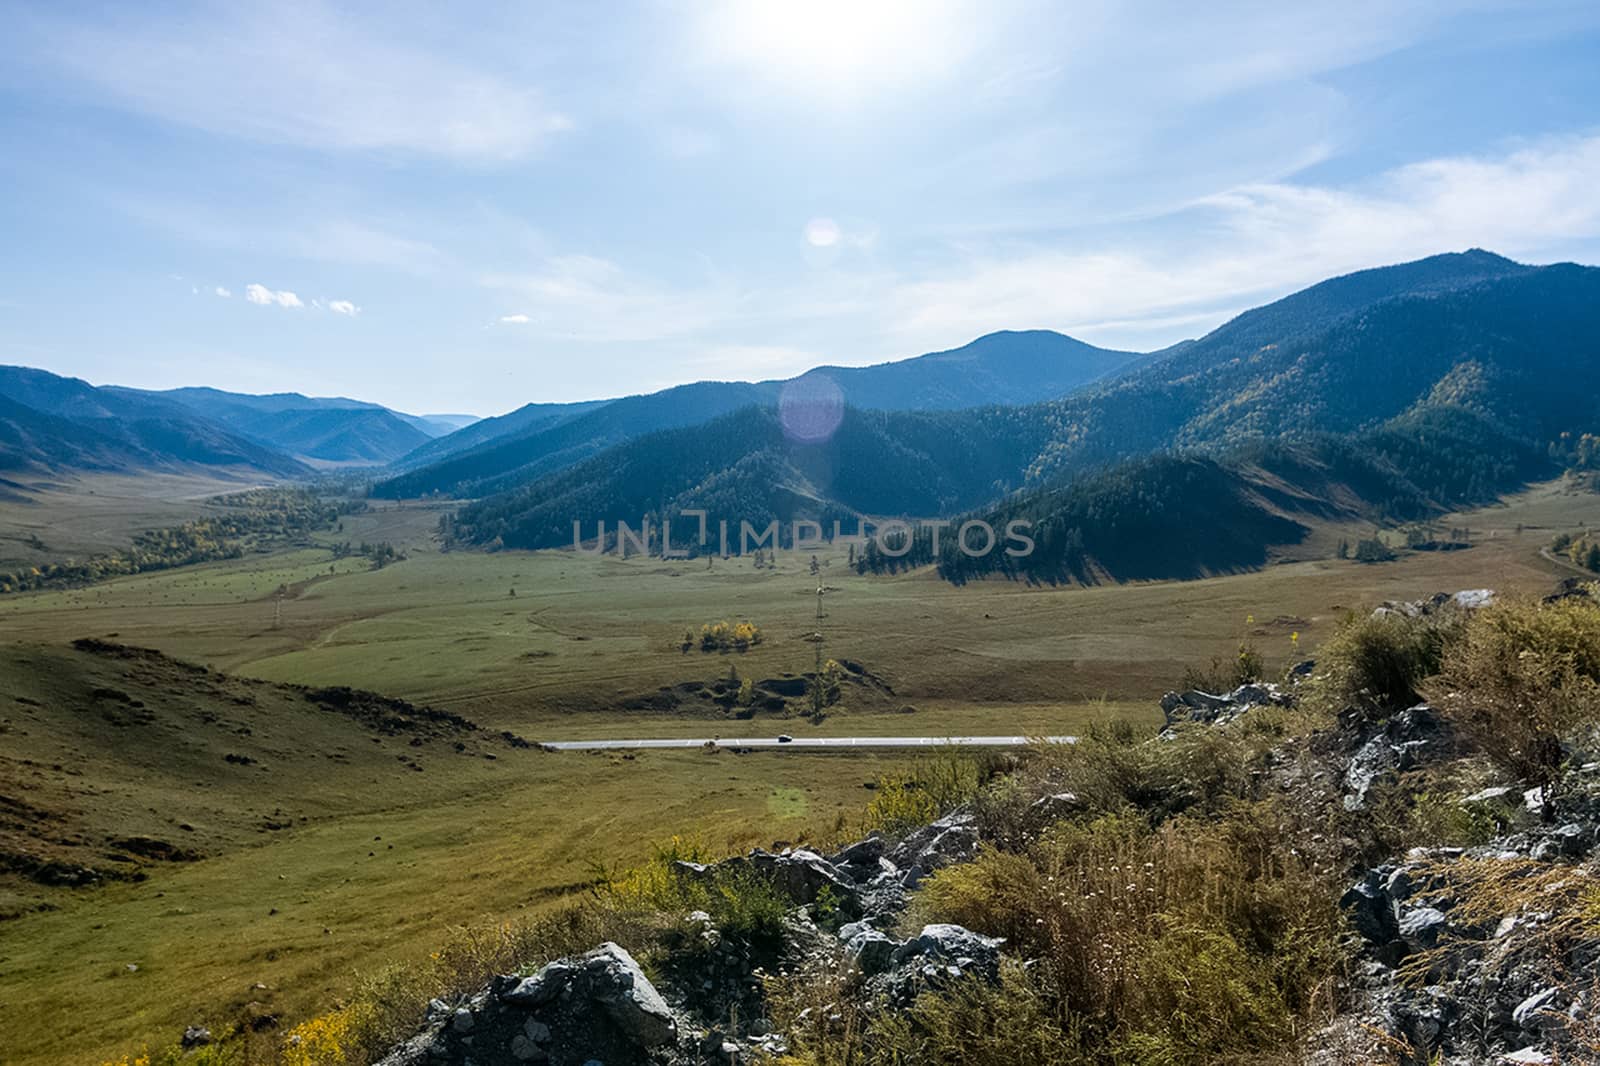 The altai mountains. landscape of nature on the Altai mountains and in the gorges between the mountains. by DePo